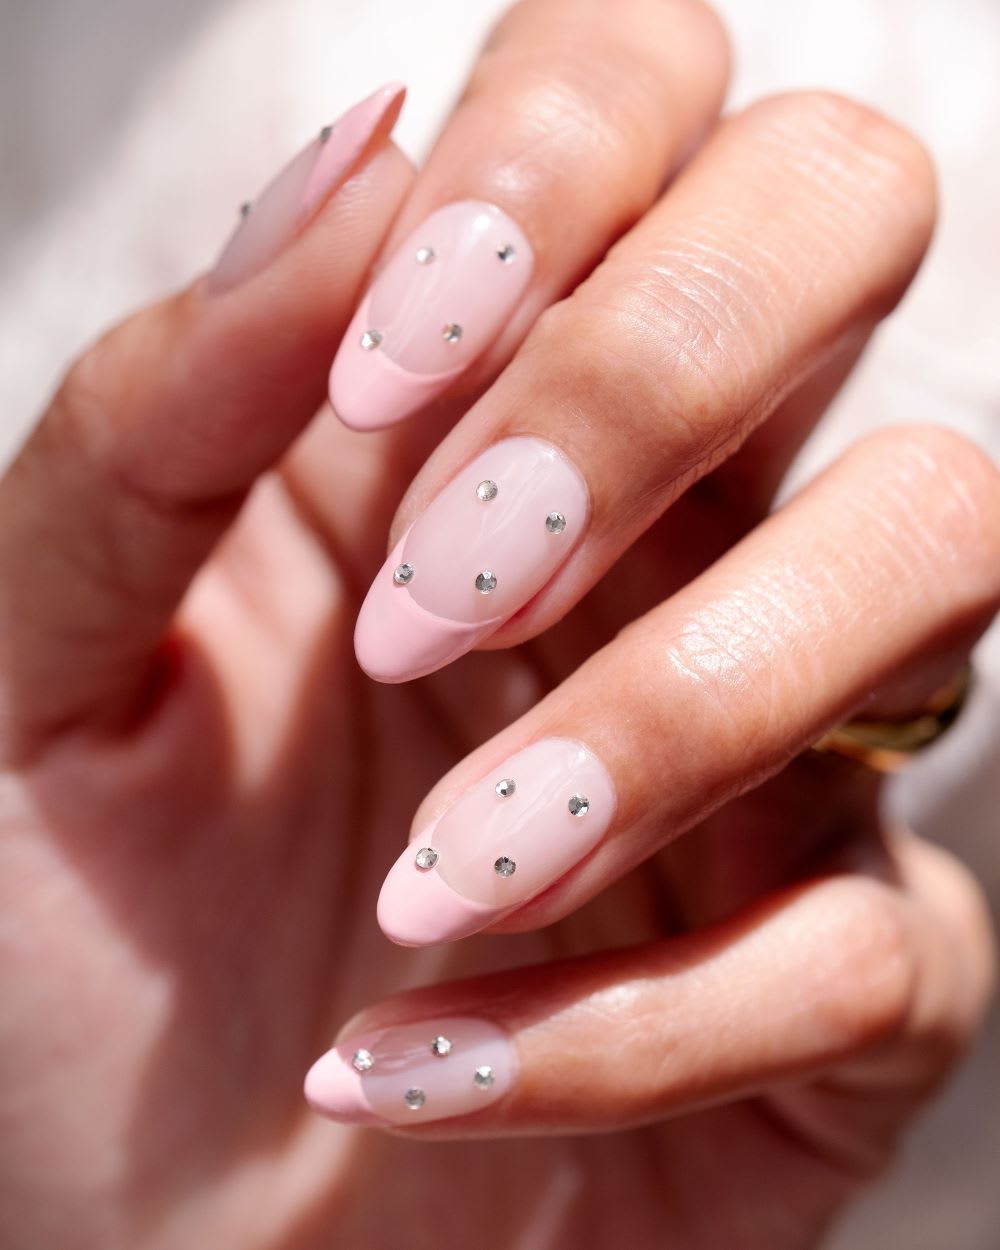 Prom Nails: 16 Mani Ideas To Complete Your Look - Lulus.com Fashion Blog